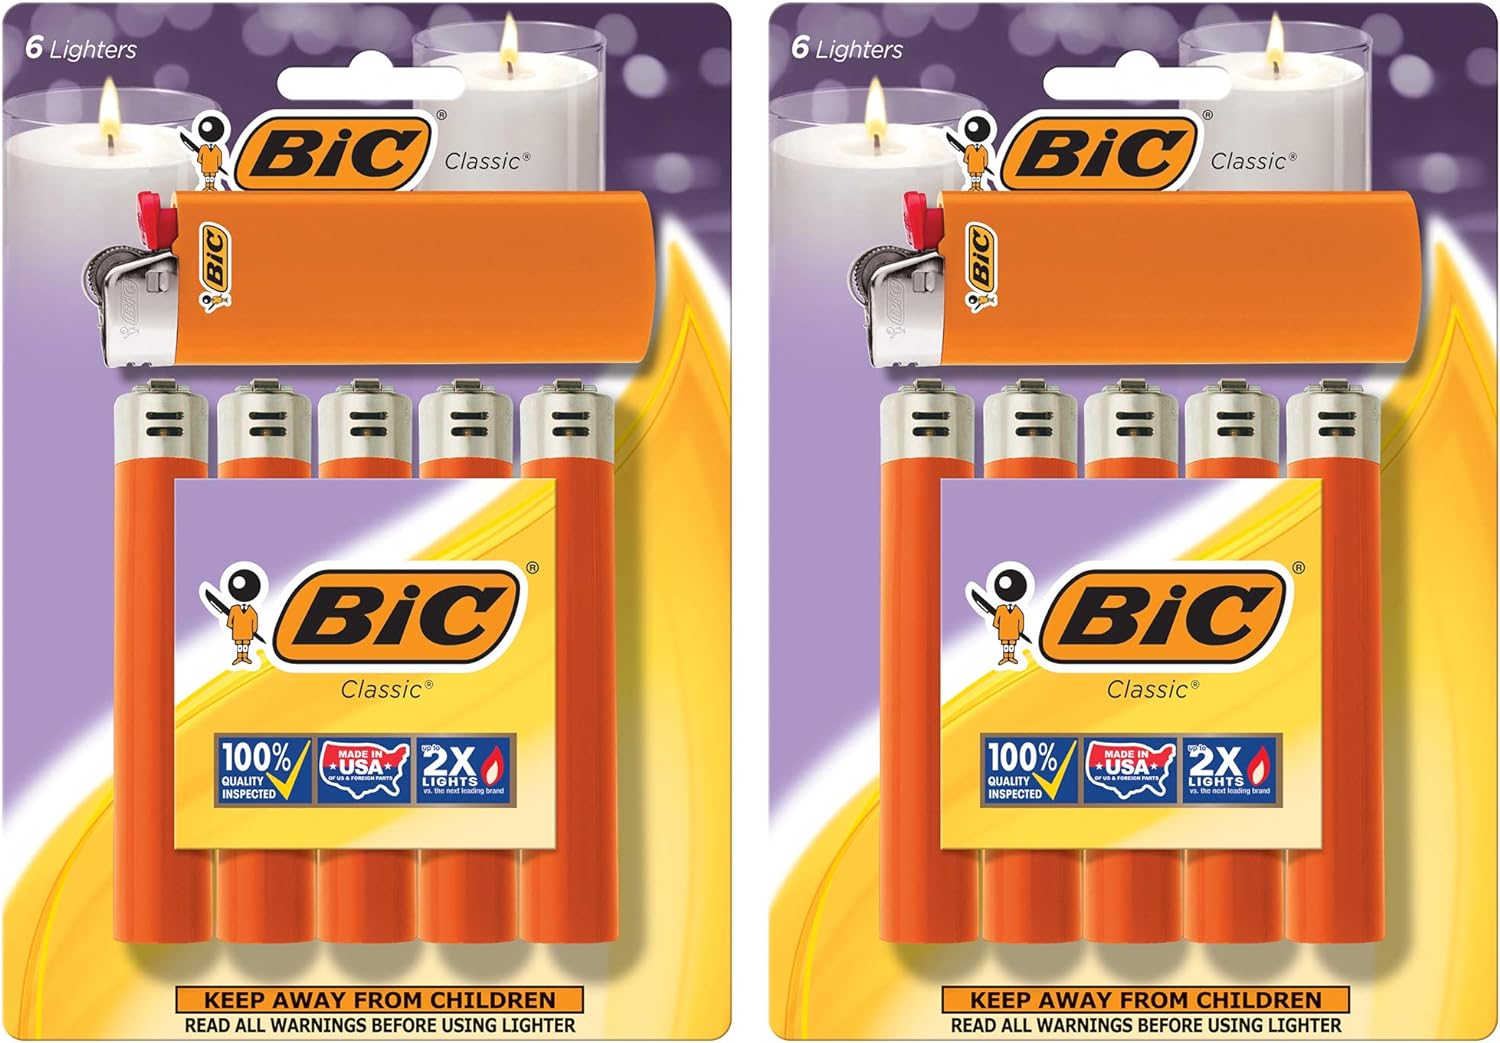 BIC Classic Lighter, Orange, 12-Pack (Packaging May Vary)